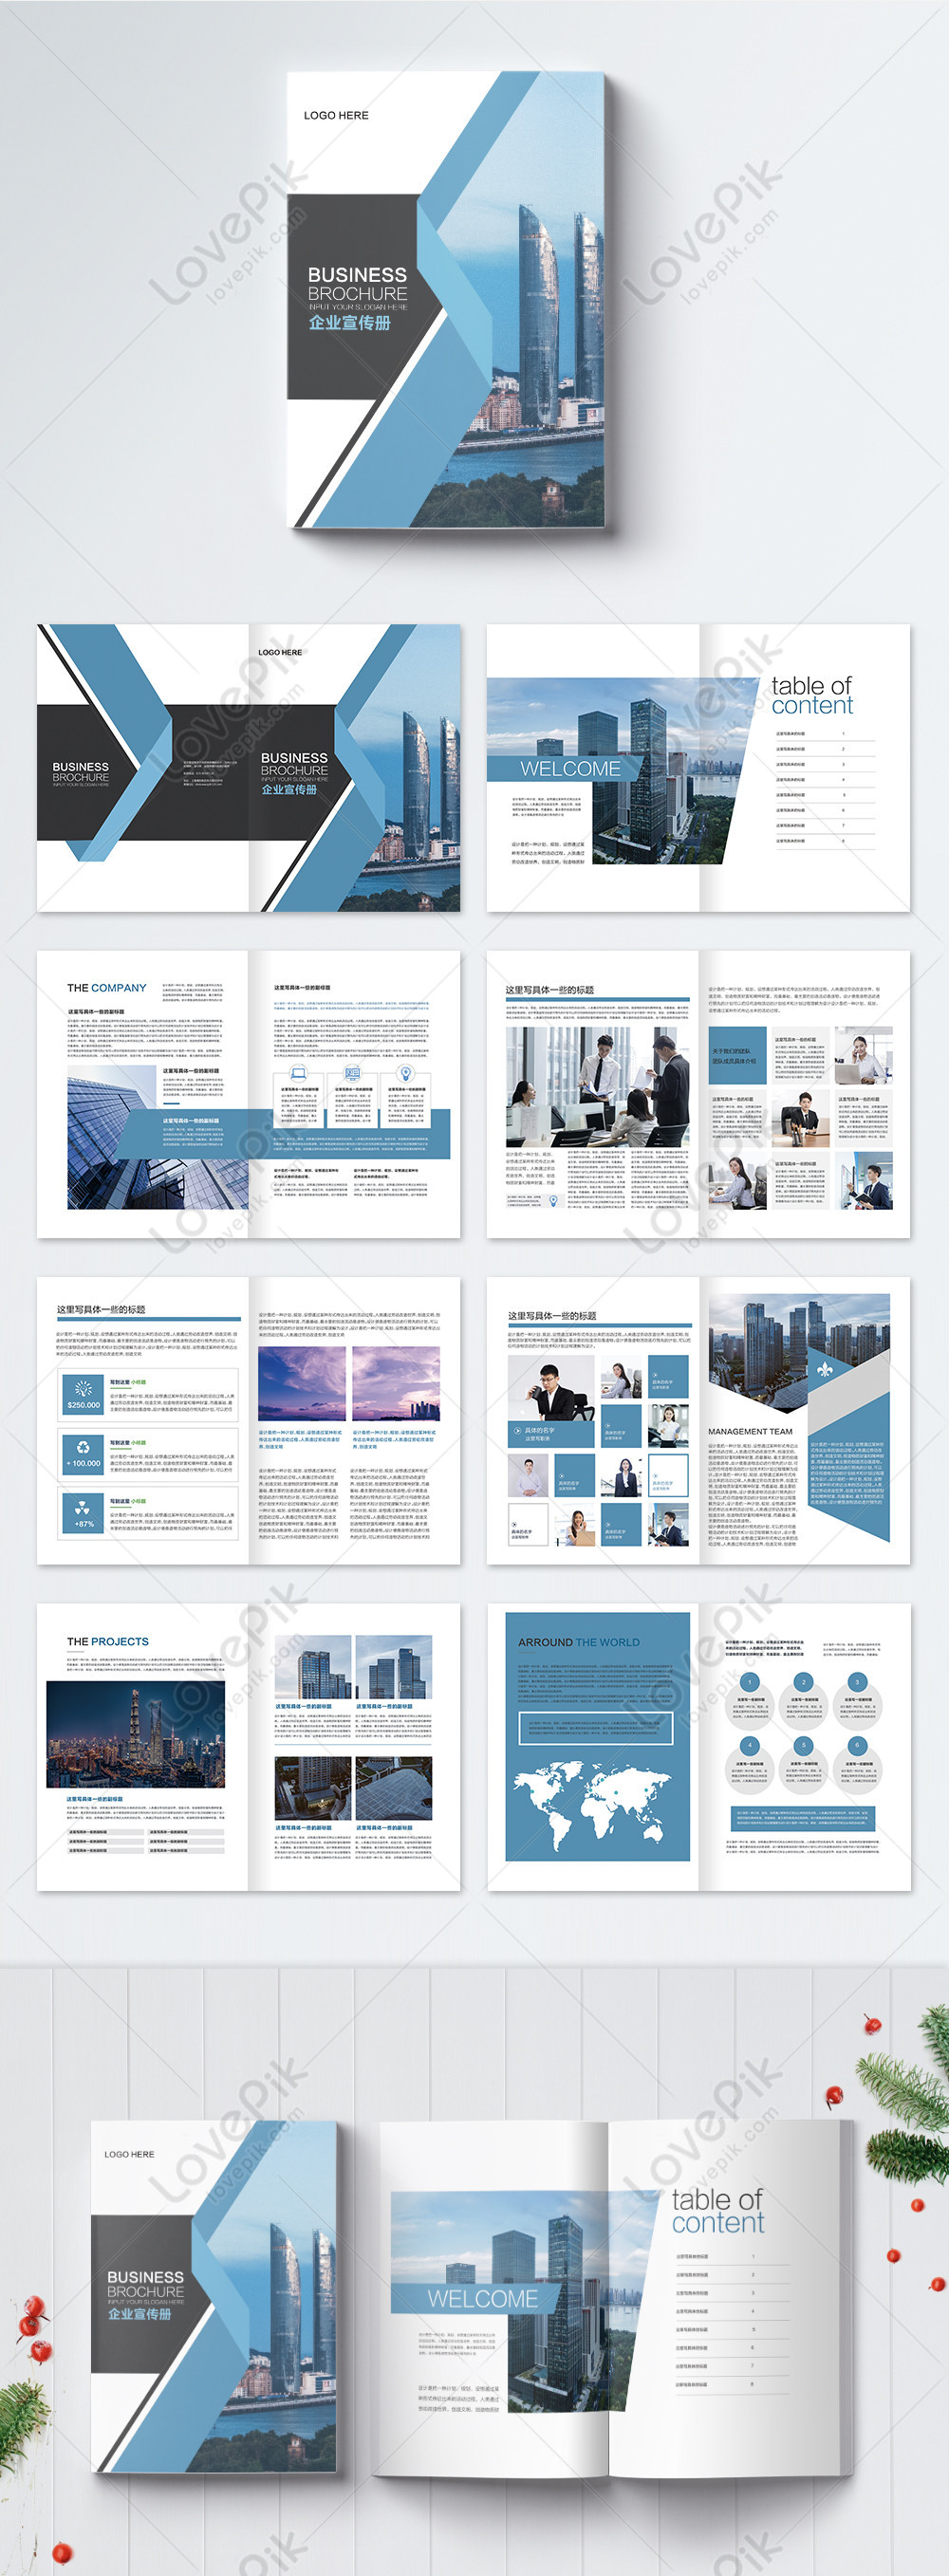 High end group propaganda brochures template image_picture free ...